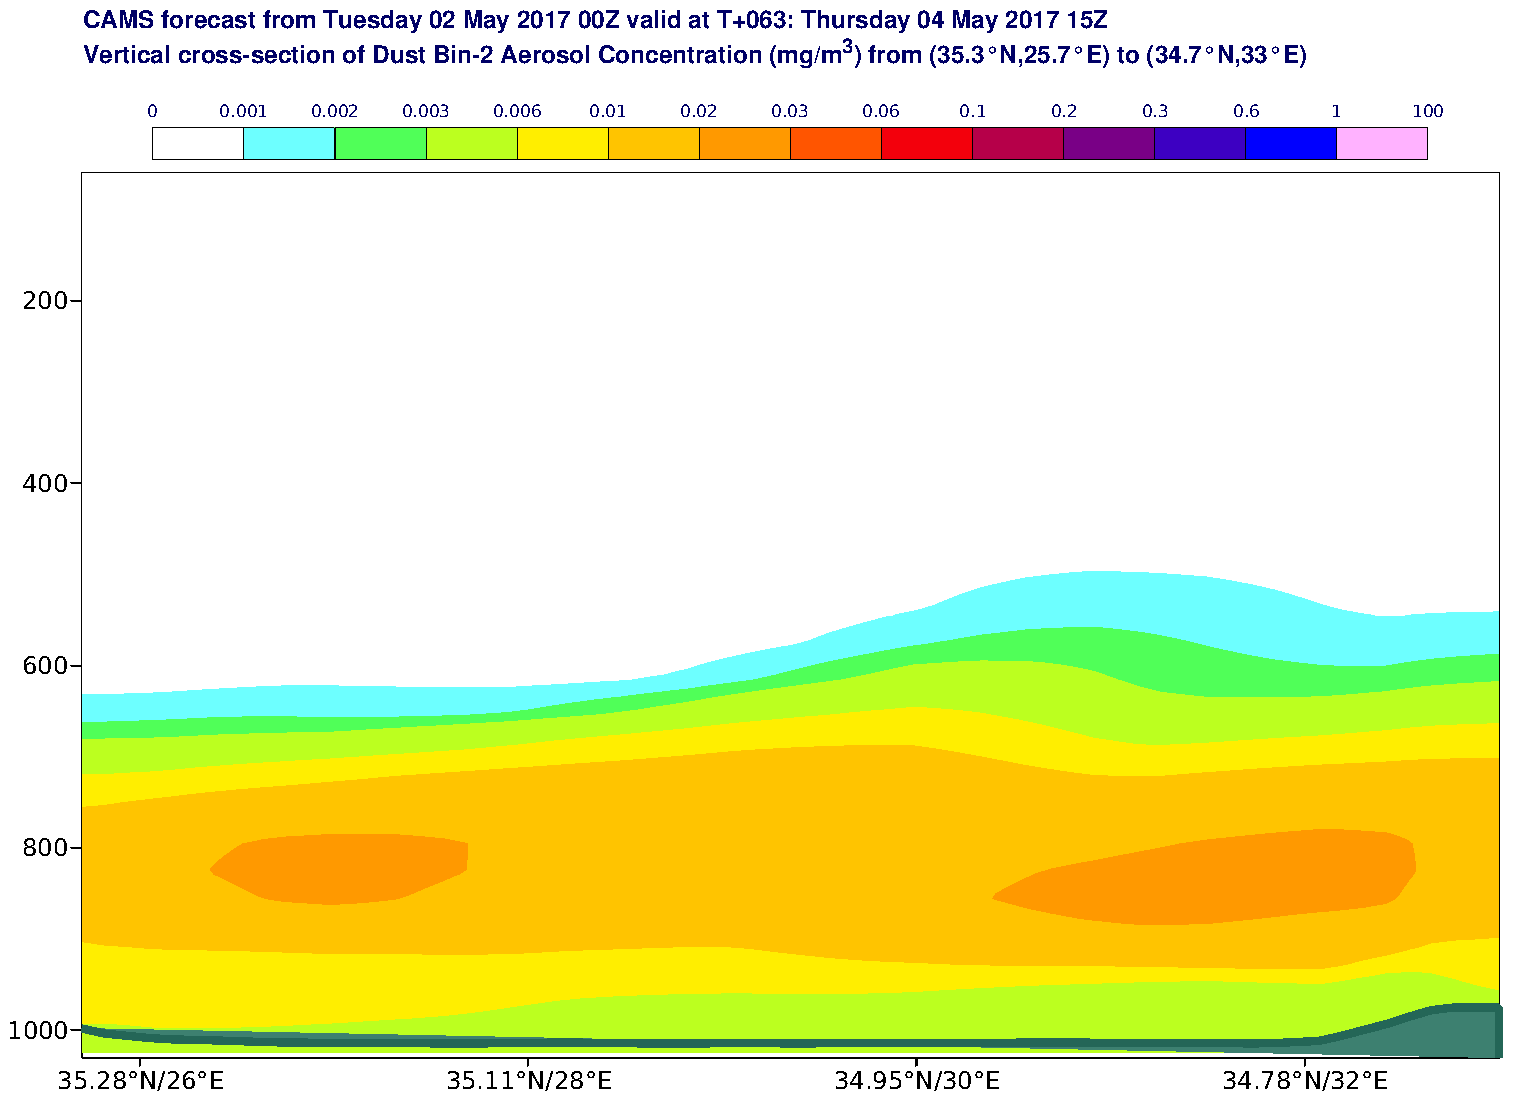 Vertical cross-section of Dust Bin-2 Aerosol Concentration (mg/m3) valid at T63 - 2017-05-04 15:00